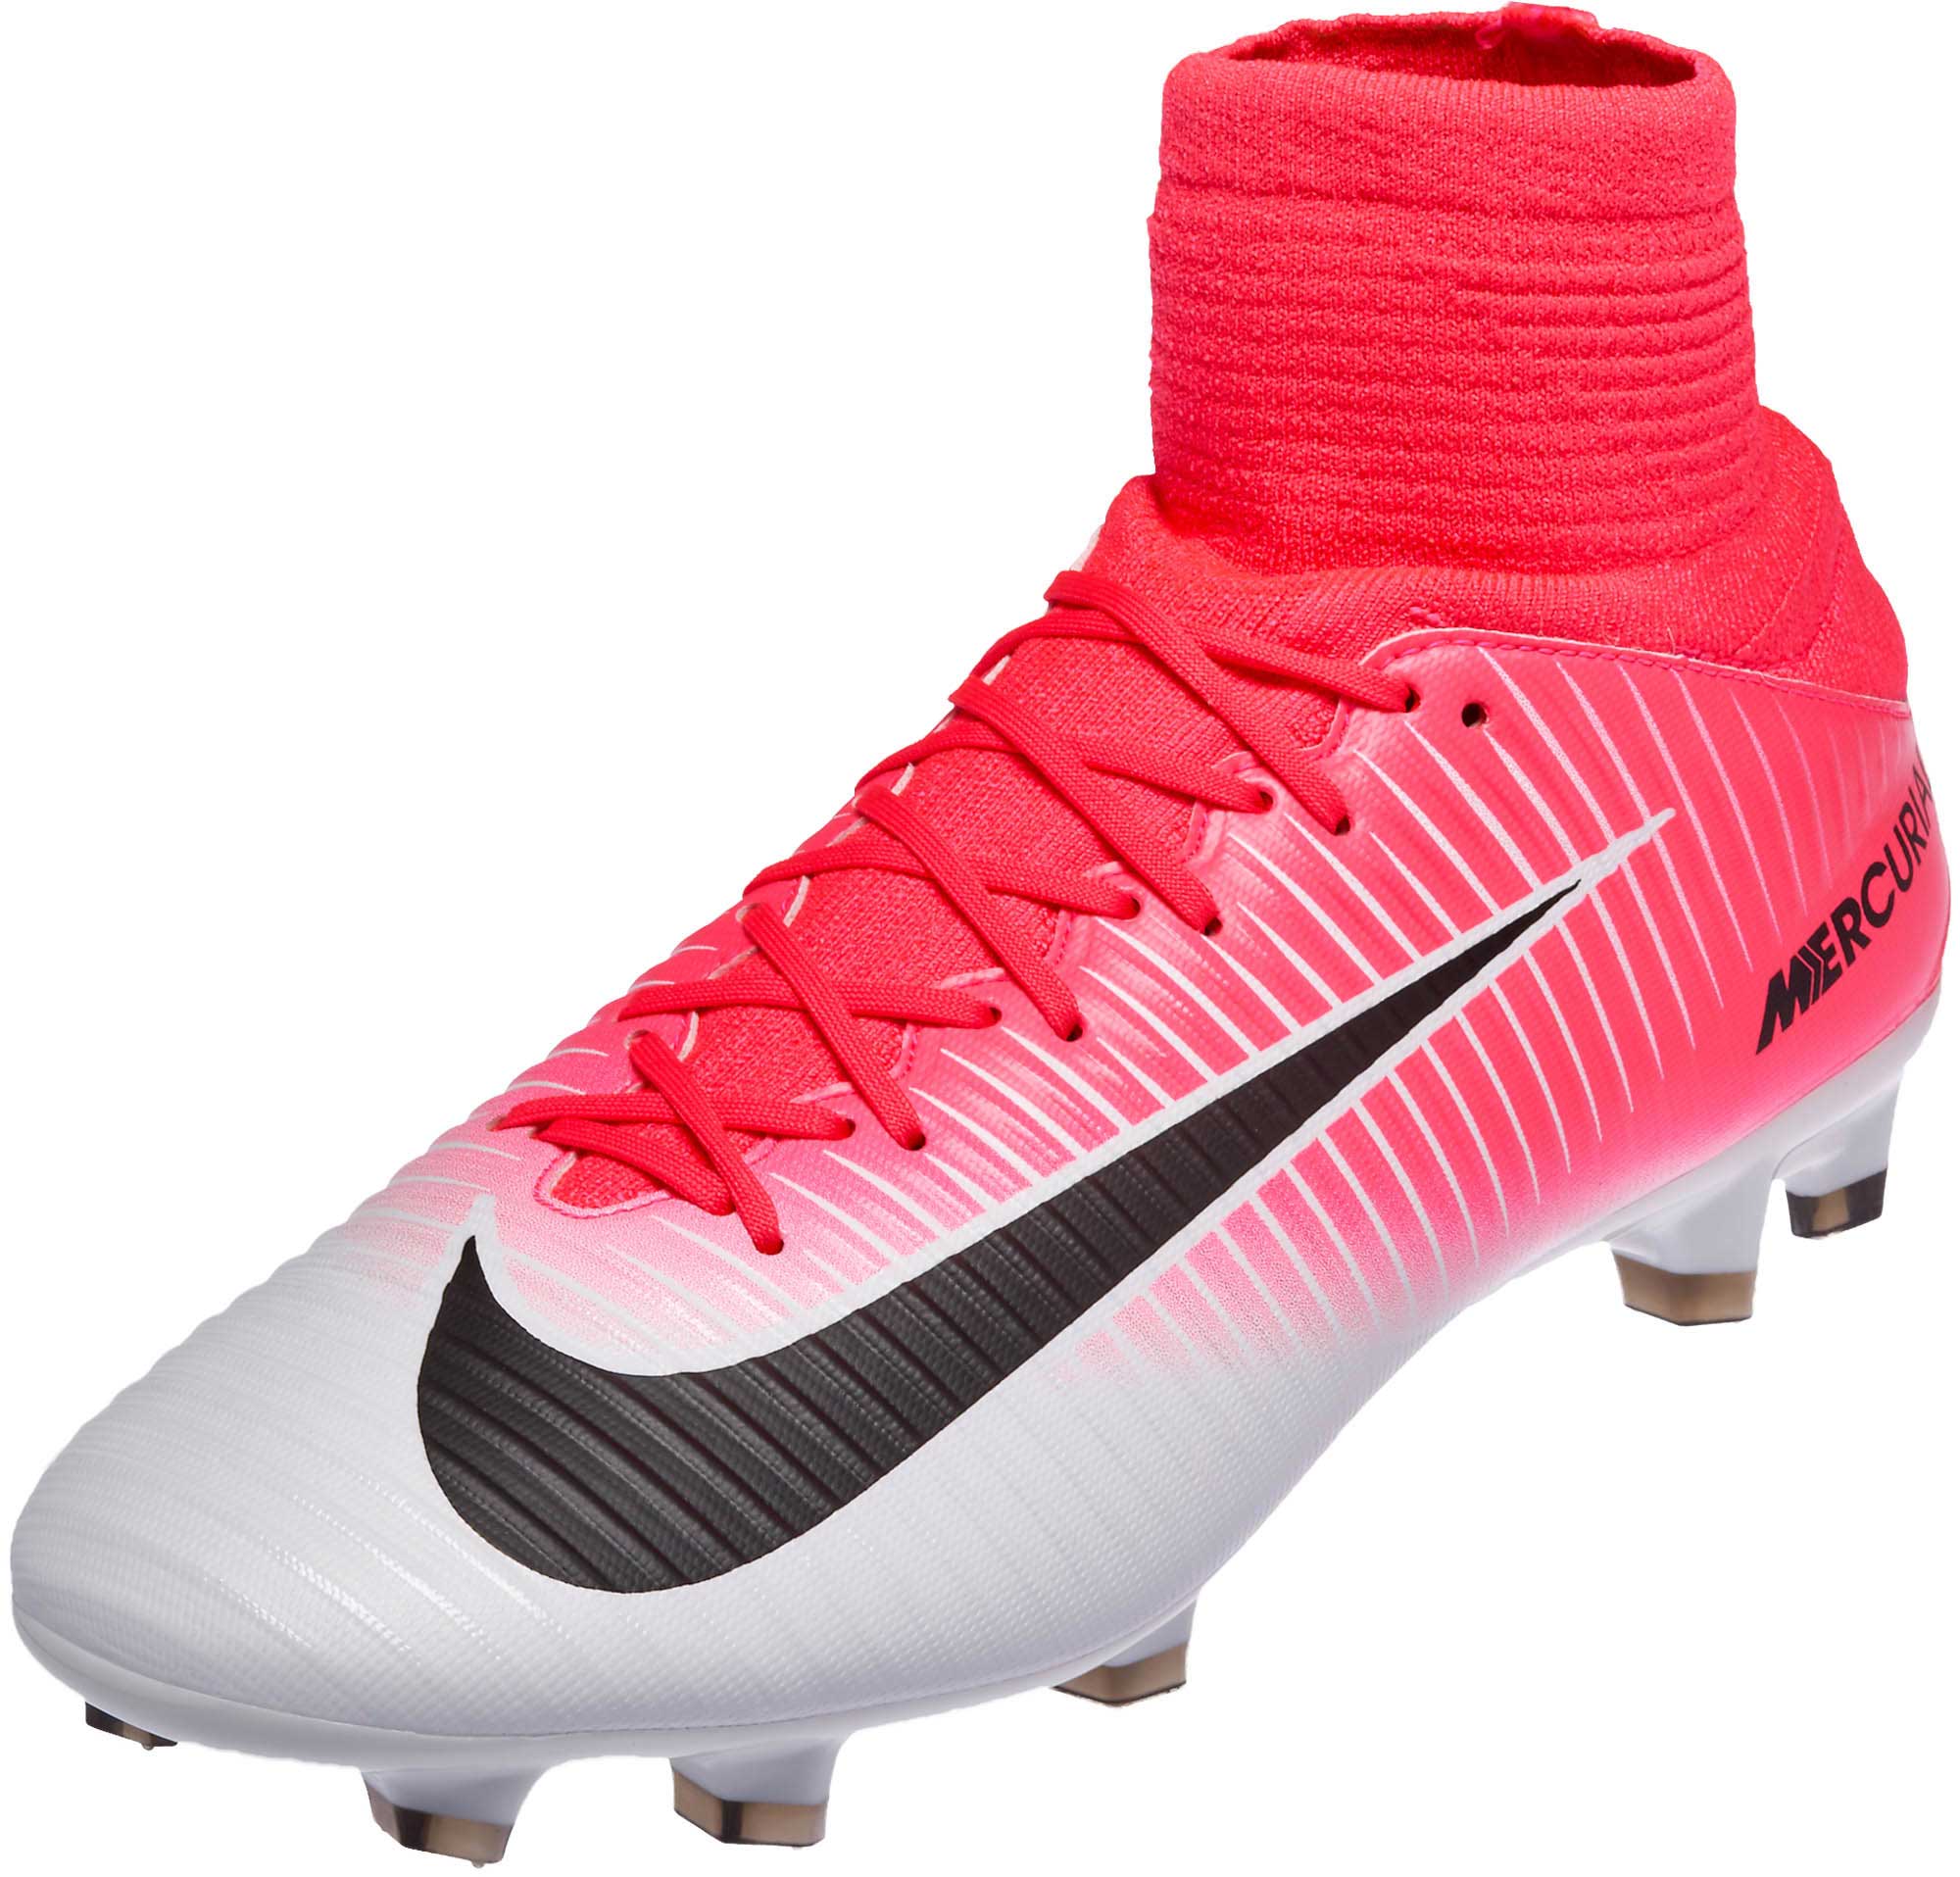 pink nike soccer shoes